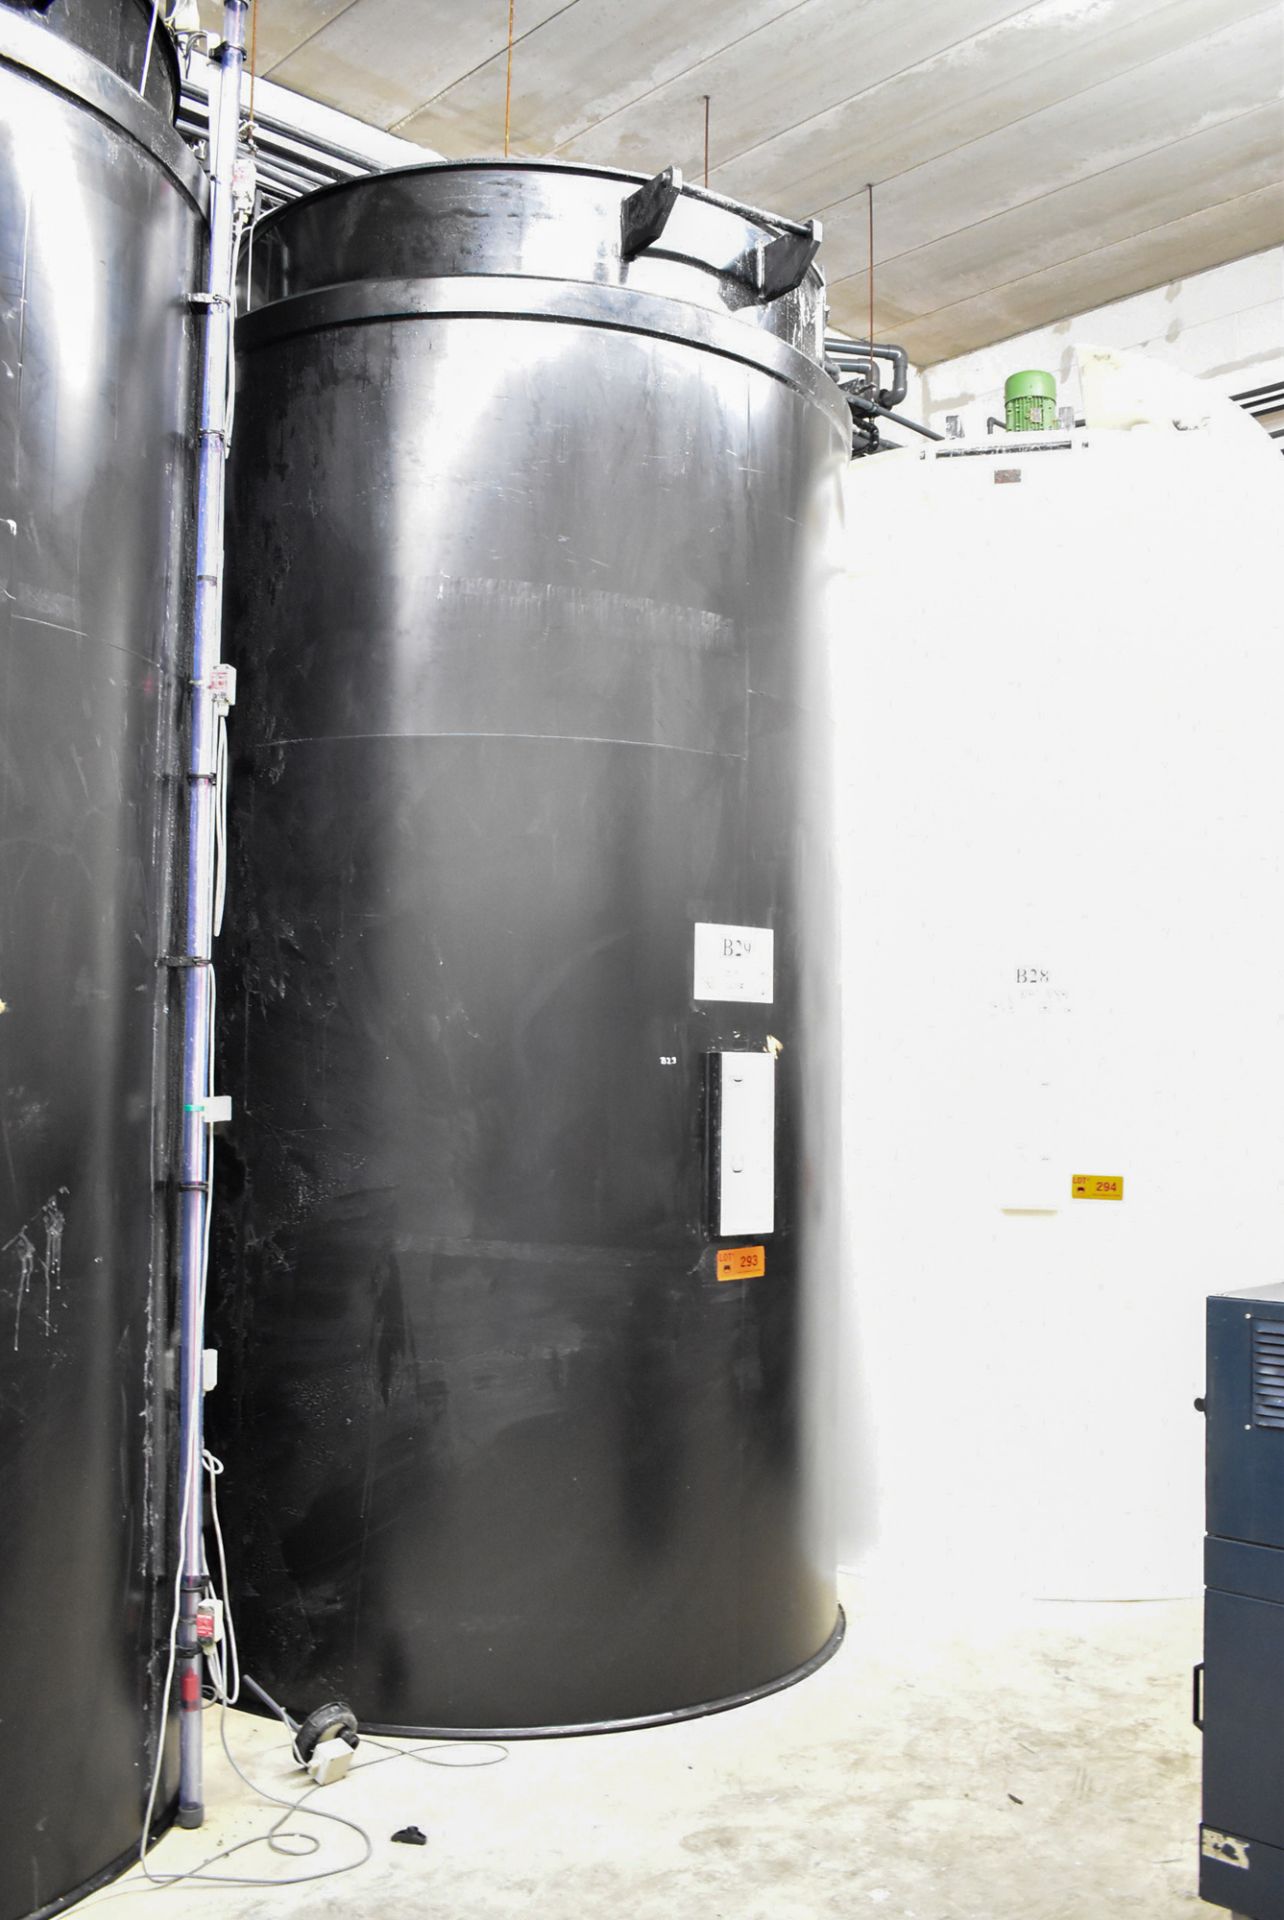 WEBER KUNSTSTOFFTECHINK (2012) LAGERTANK COMPOSITE HOLDING TANK WITH 1950 MM DIA X 4300 MM H, 12,